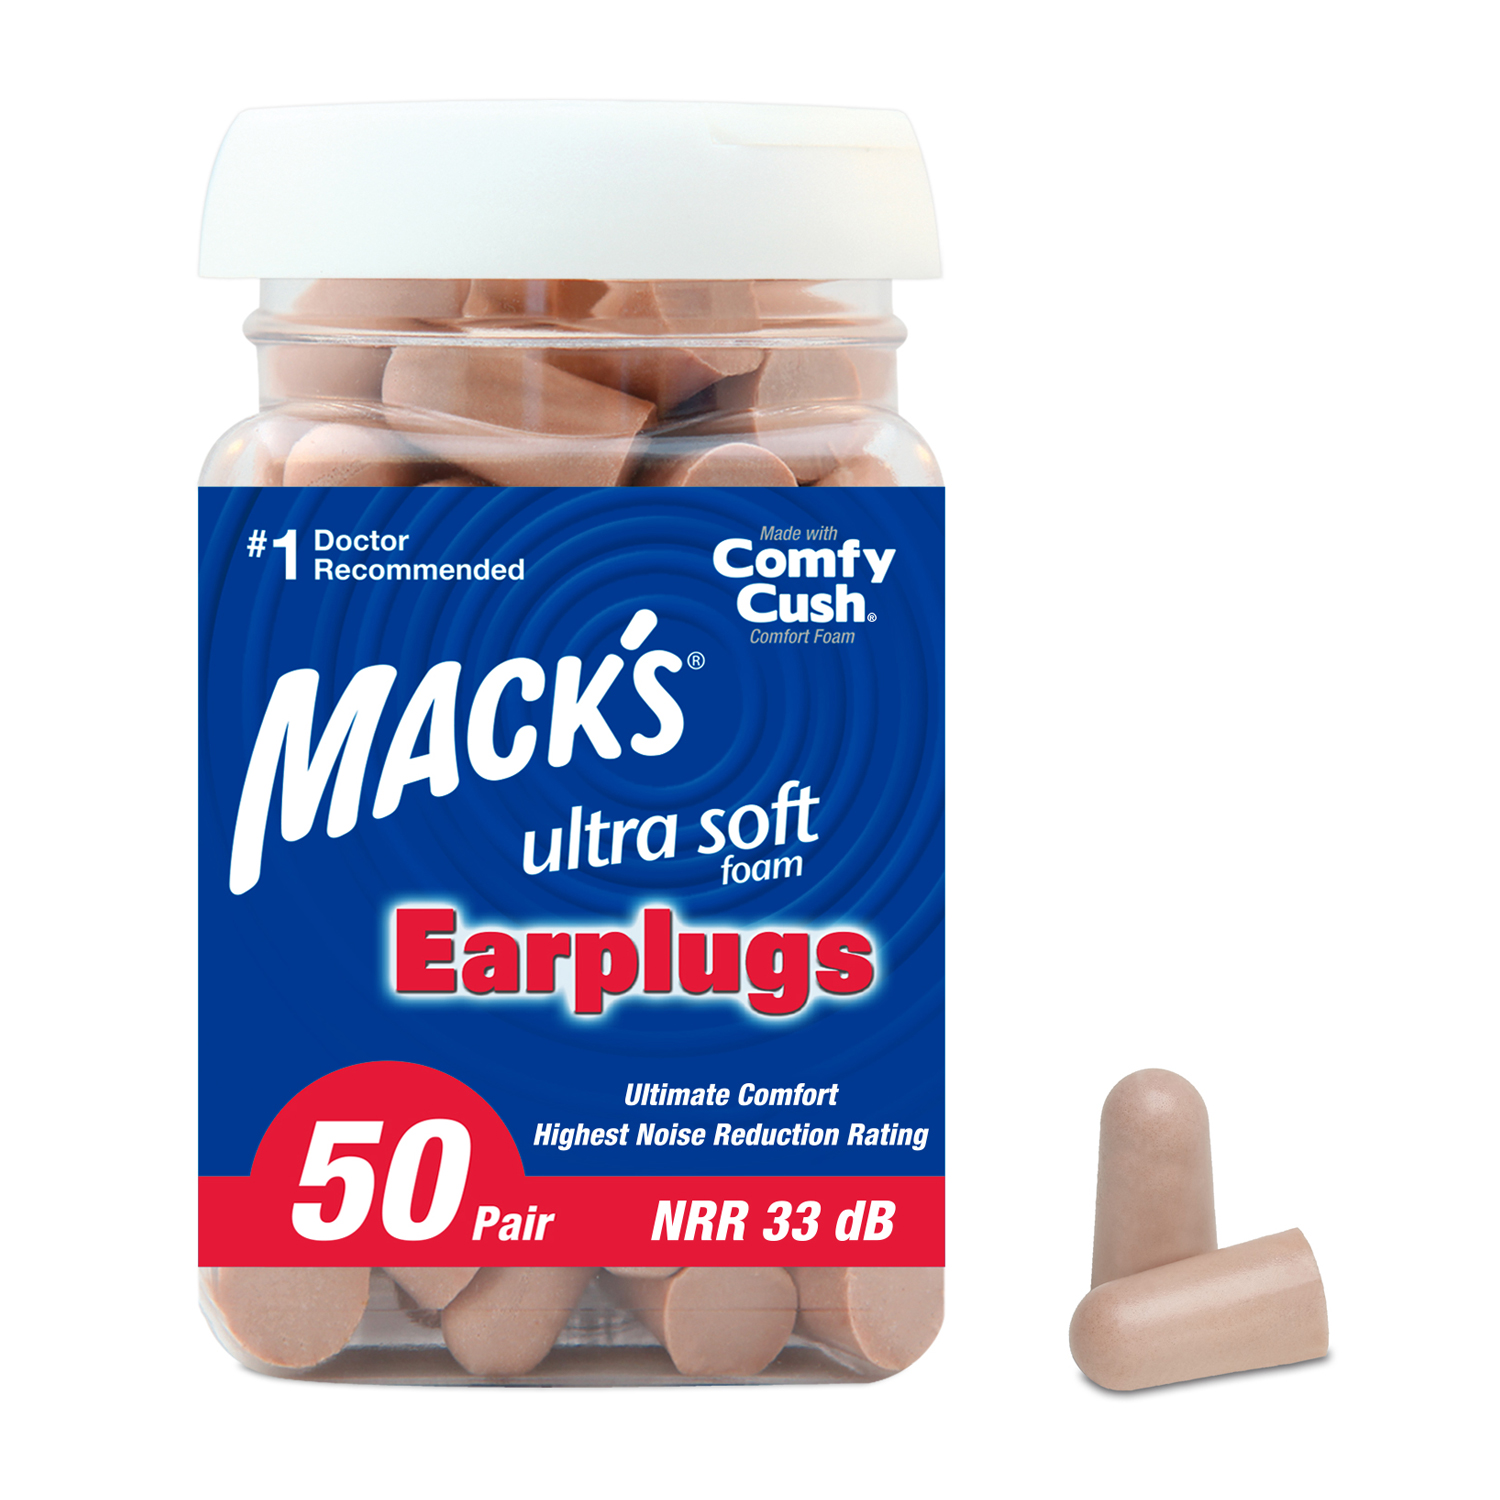 Mack's Ultra Soft Foam Earplugs, 50 Pair - 33dB Highest NRR, Comfortable Ear Plugs for Sleeping, Snoring, Travel, Concerts, Studying, Loud Noise, Work | Made in USA - image 1 of 8